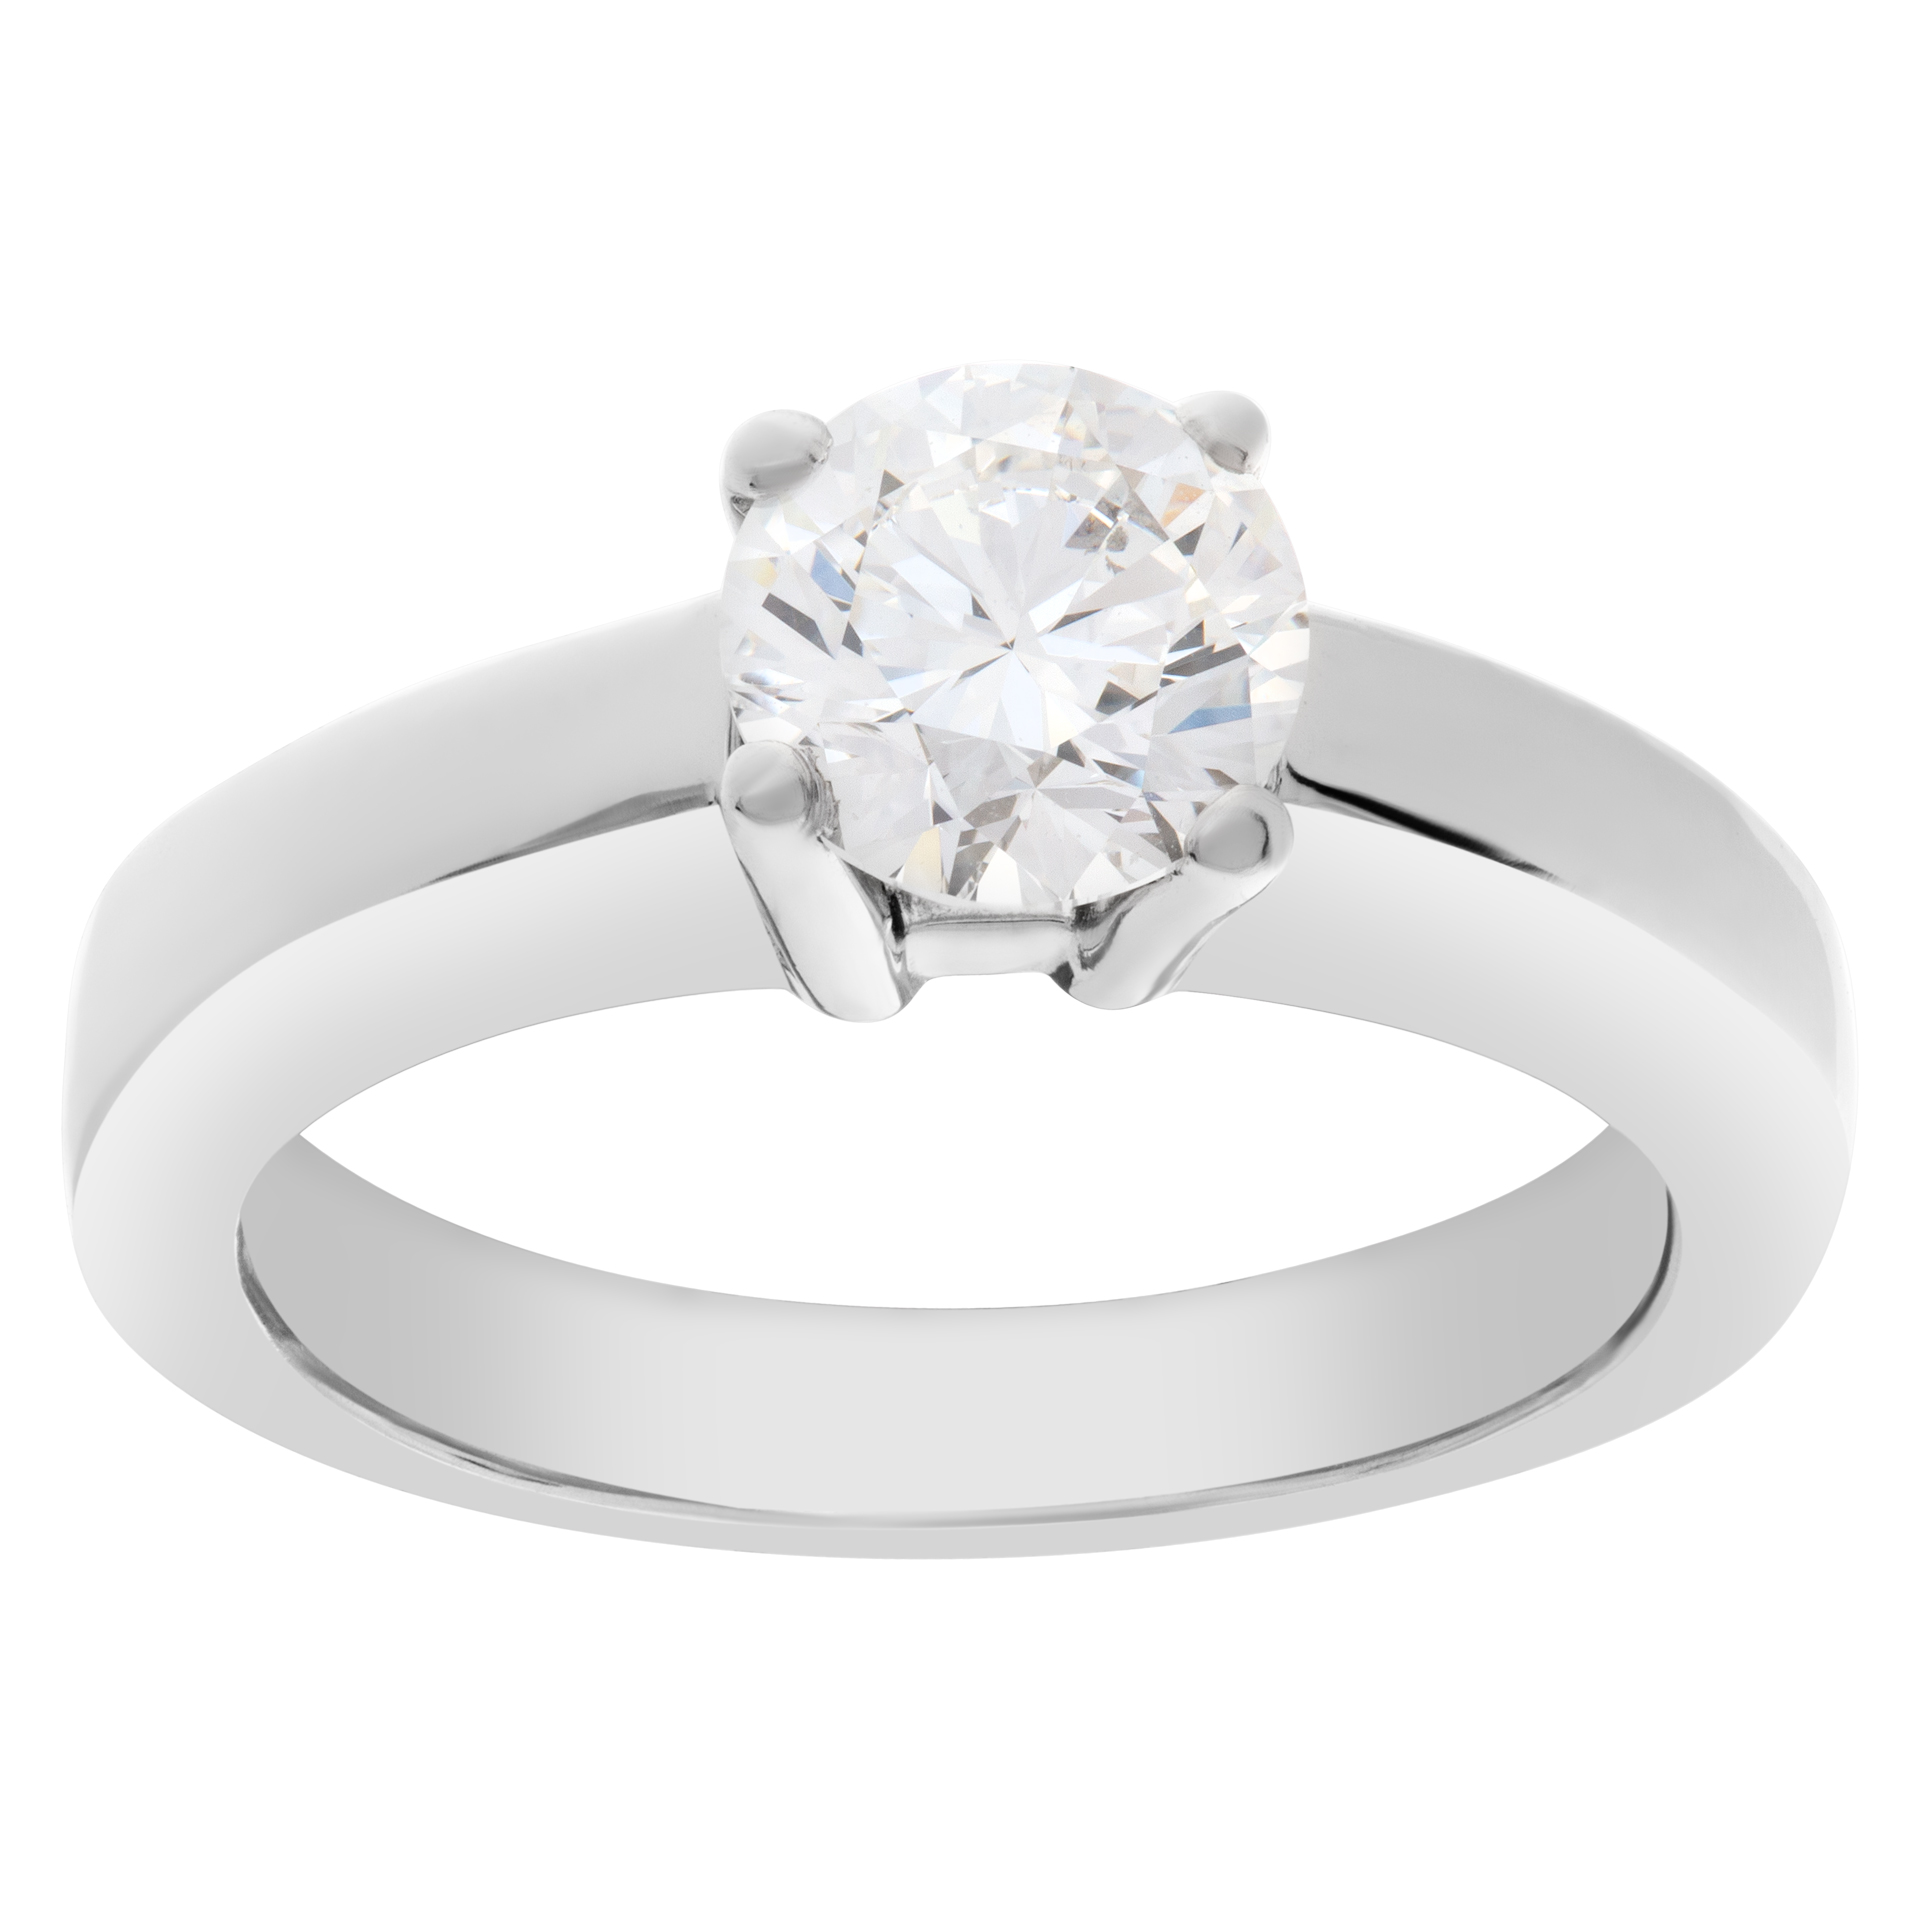 GIA Certified Diamond 1 ct (E color, VVS2 clarity) ring set in platinum. Size 5.25